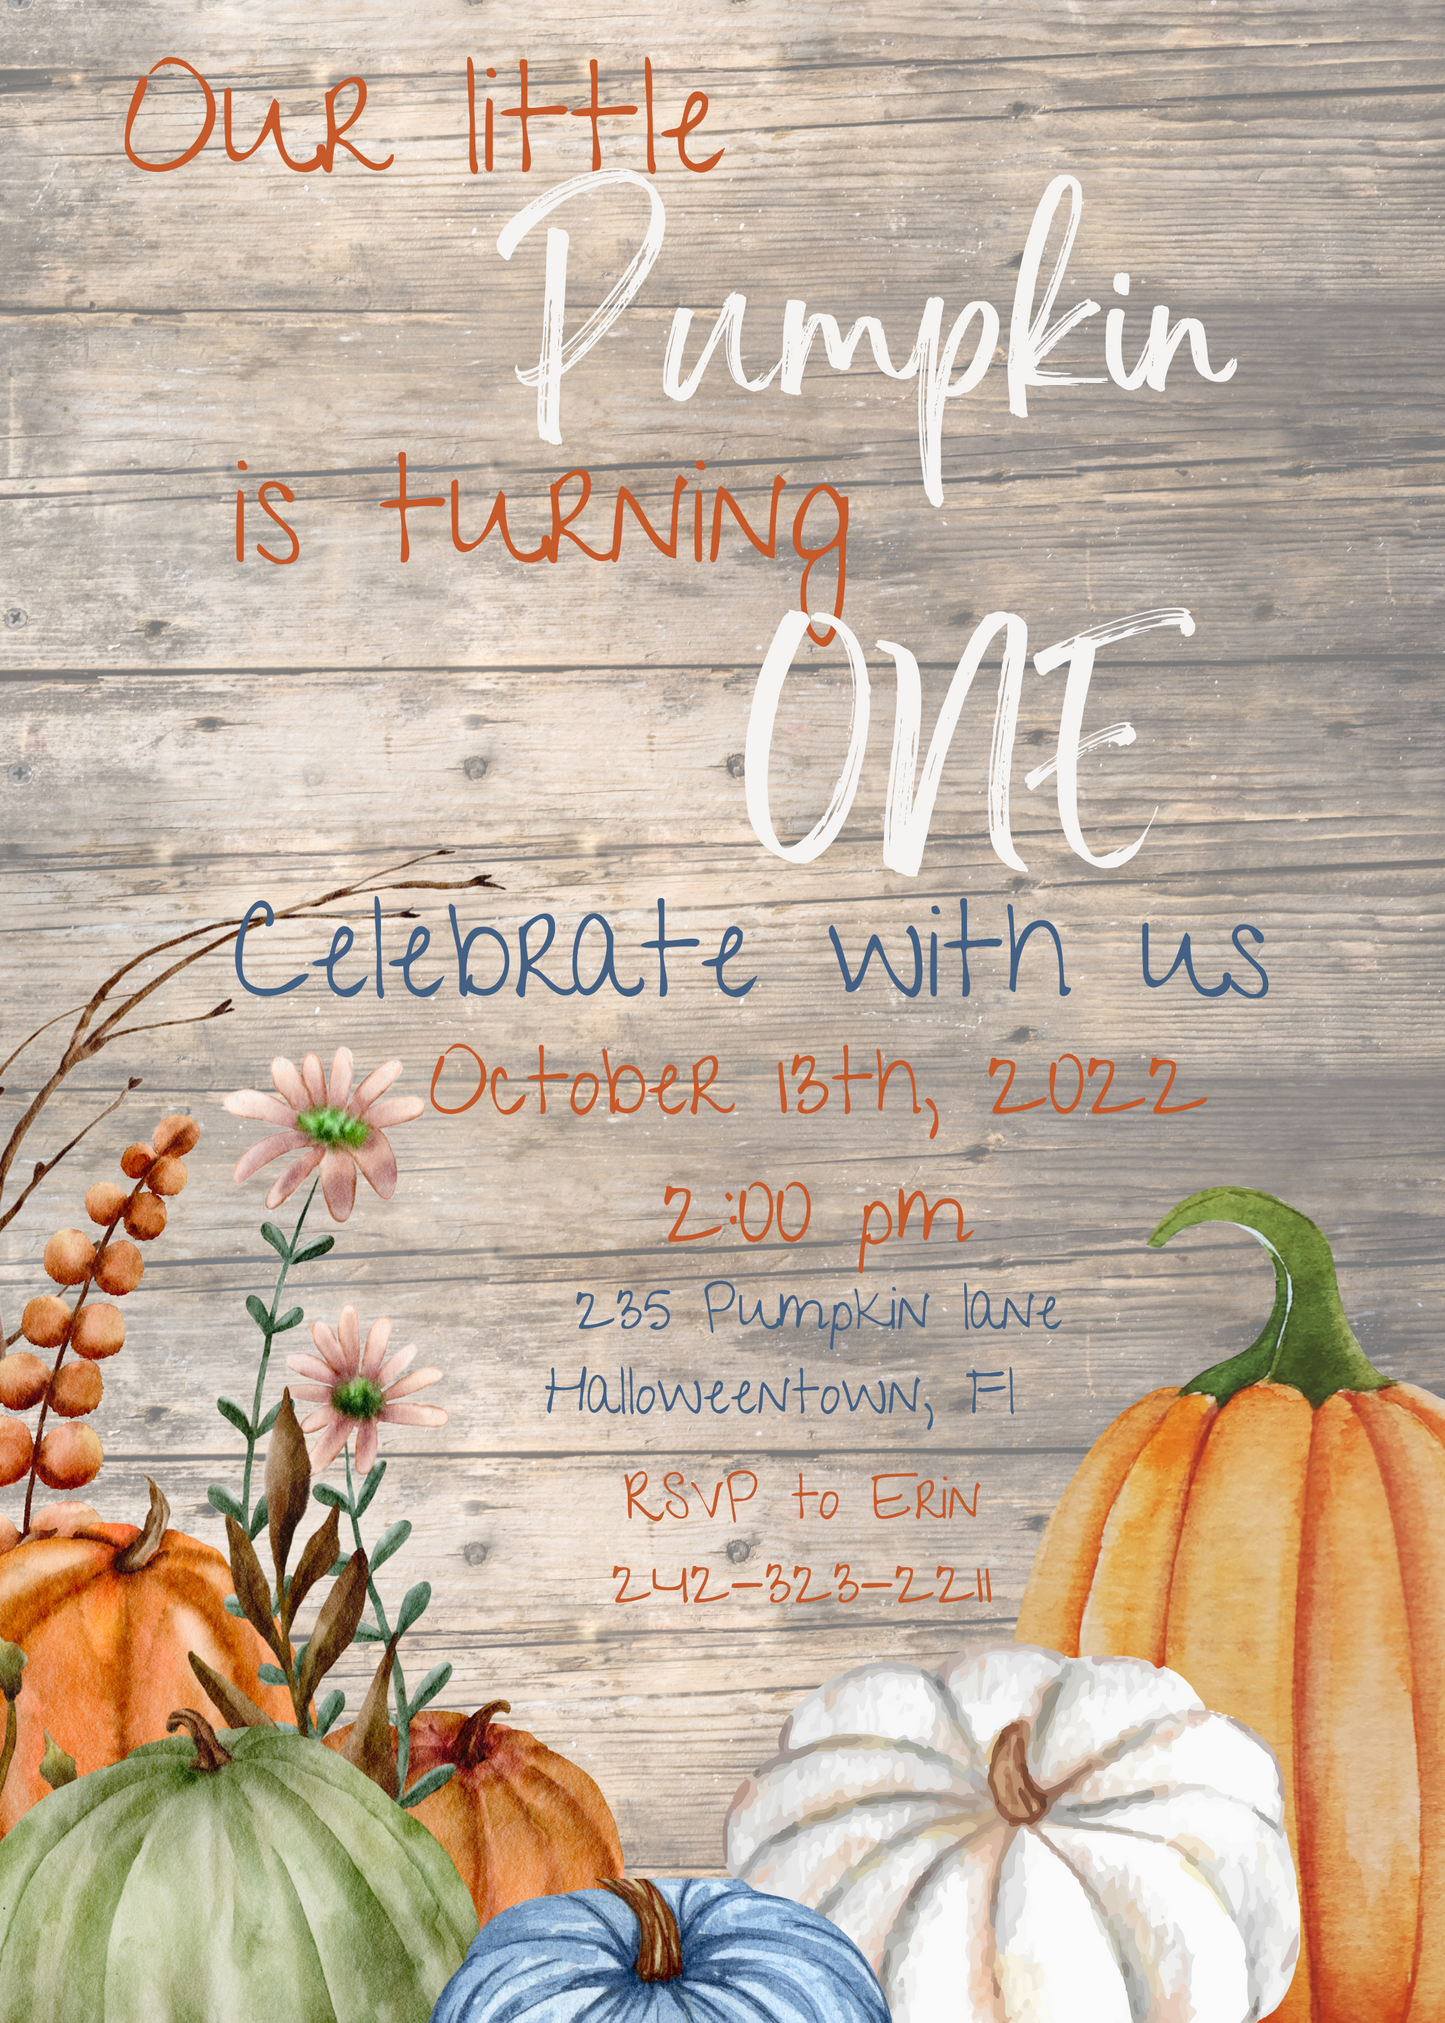 Our Little Pumpkin is One themed Birthday Invitation